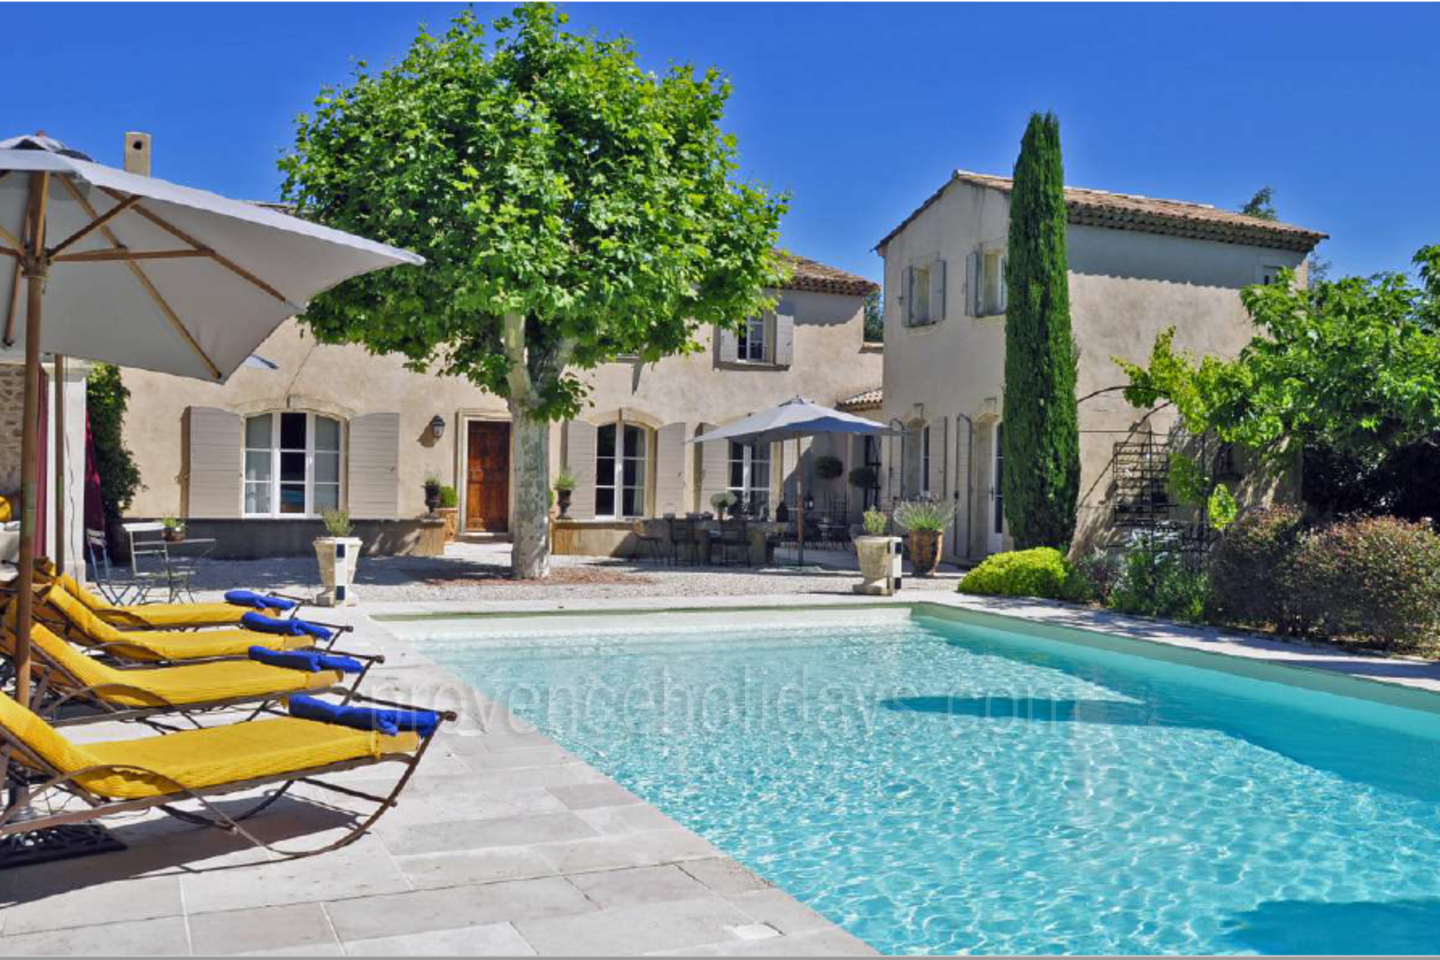 Beautiful Farmhouse with Heated Pool in Eygalières 1 - Mas des Papillons: Villa: Pool